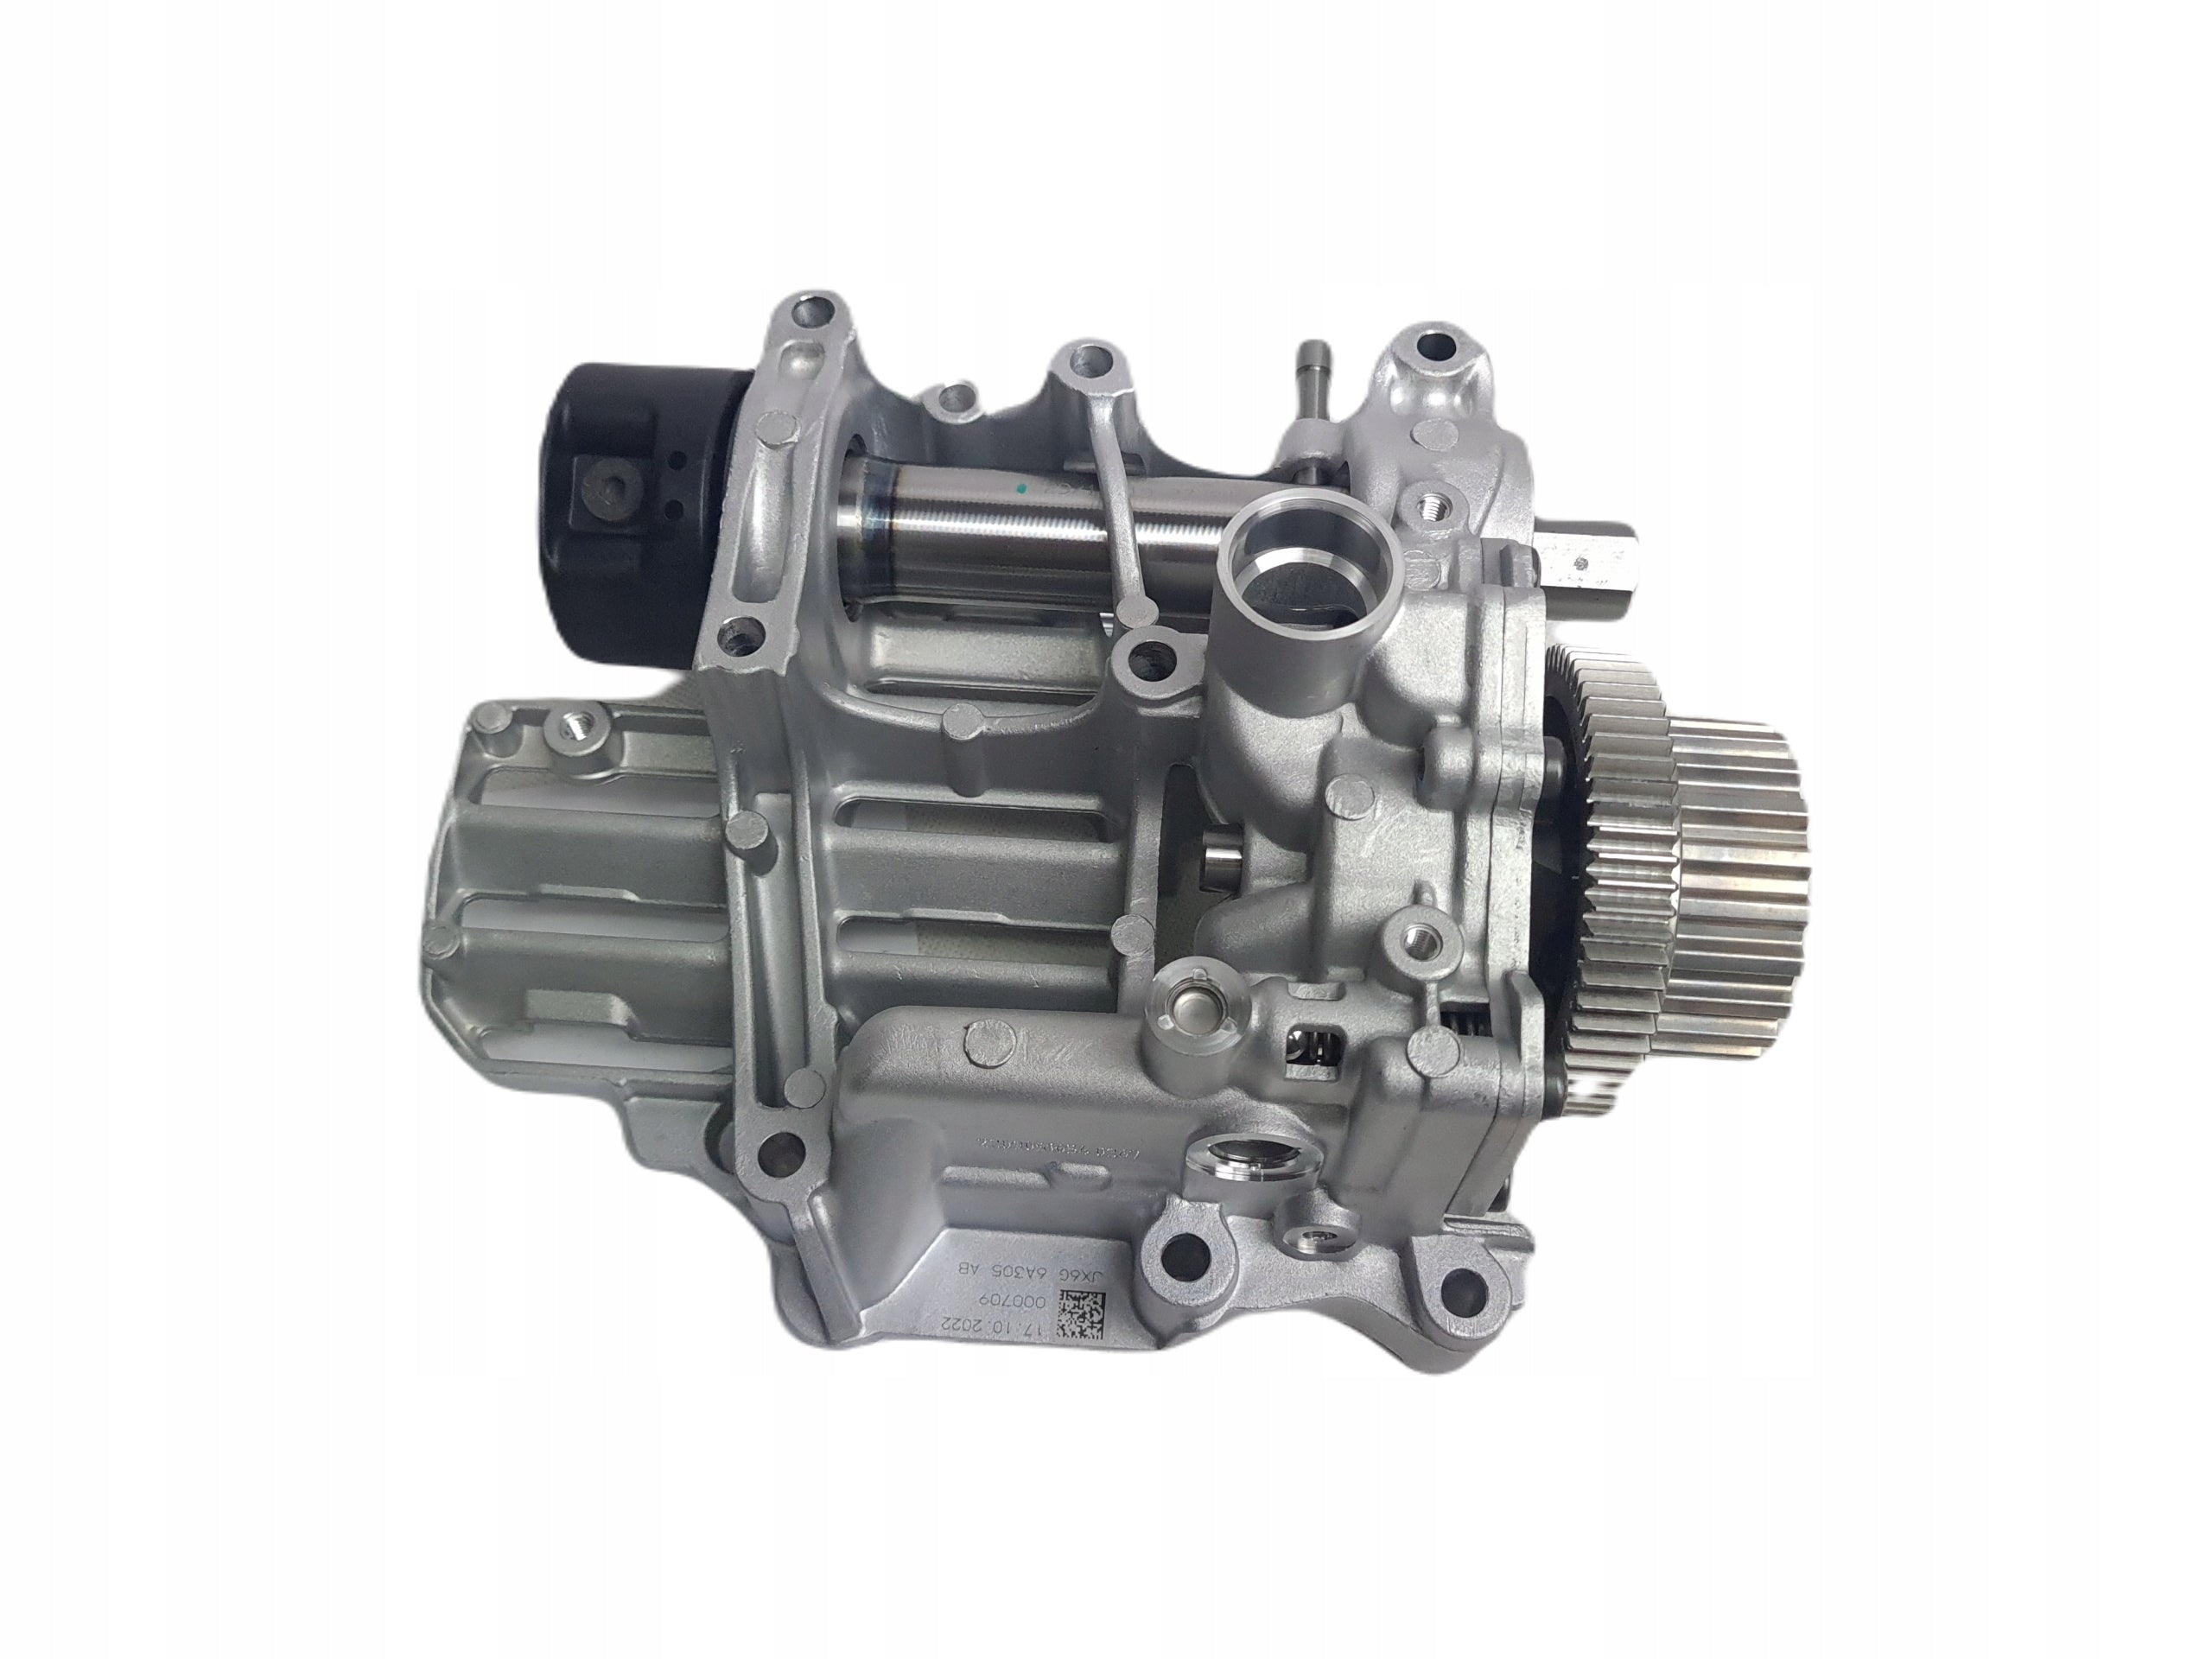 Fiesta / Focus 1.0 Ecoboost 8-Speed Automatic Oil Pump and Balance Shaft Assembly - Wayside Performance 